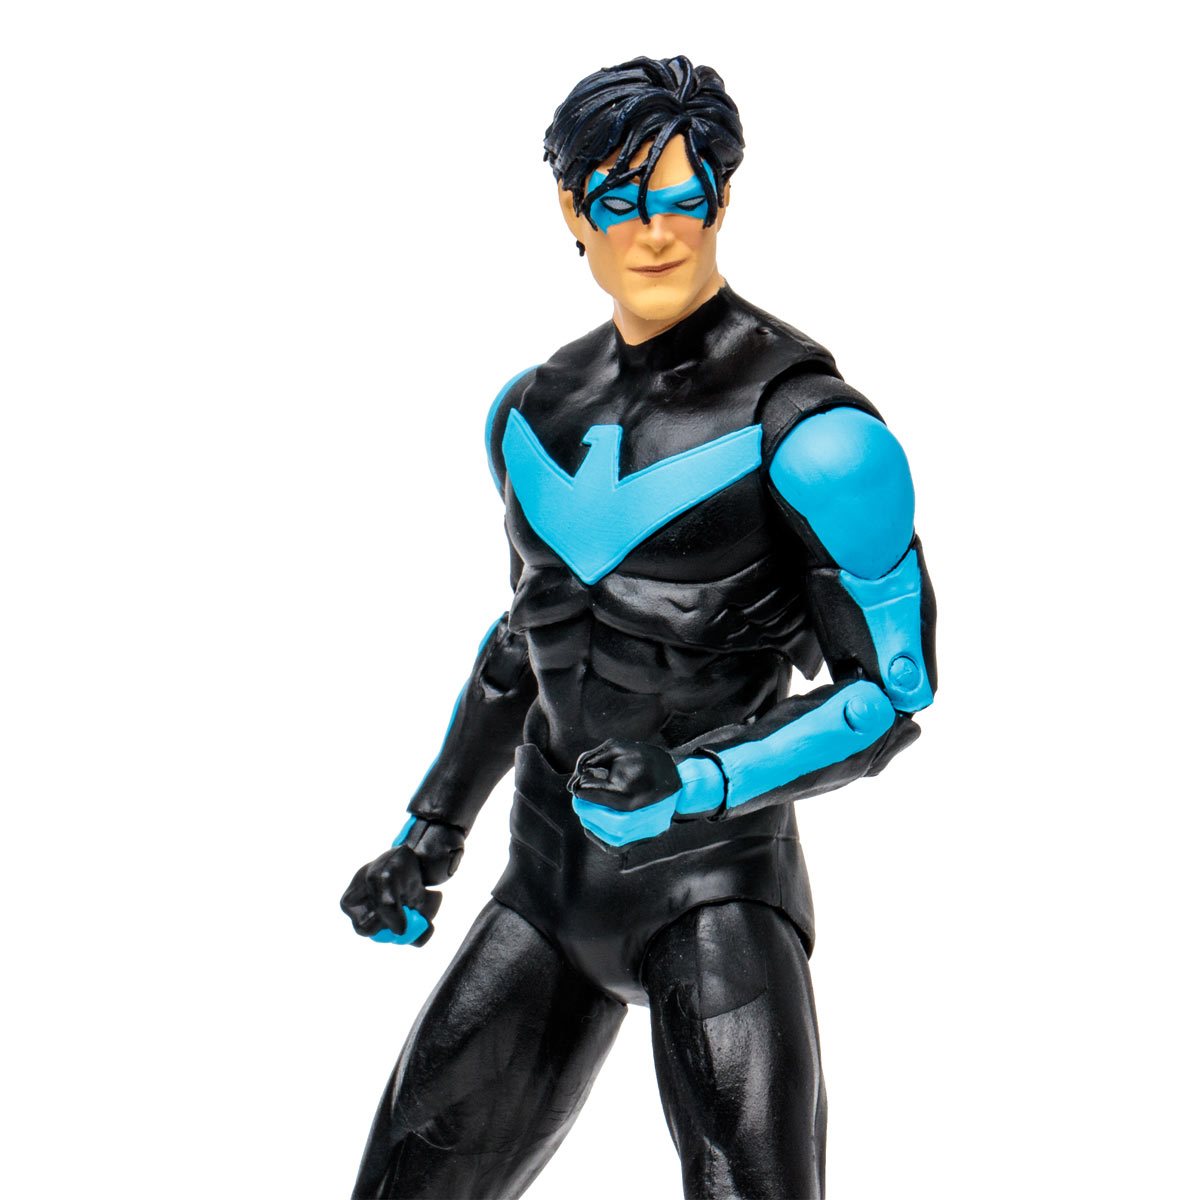 Mcfarlane DC Multiverse: Build-A Wave Titans - Nightwing Action Figure